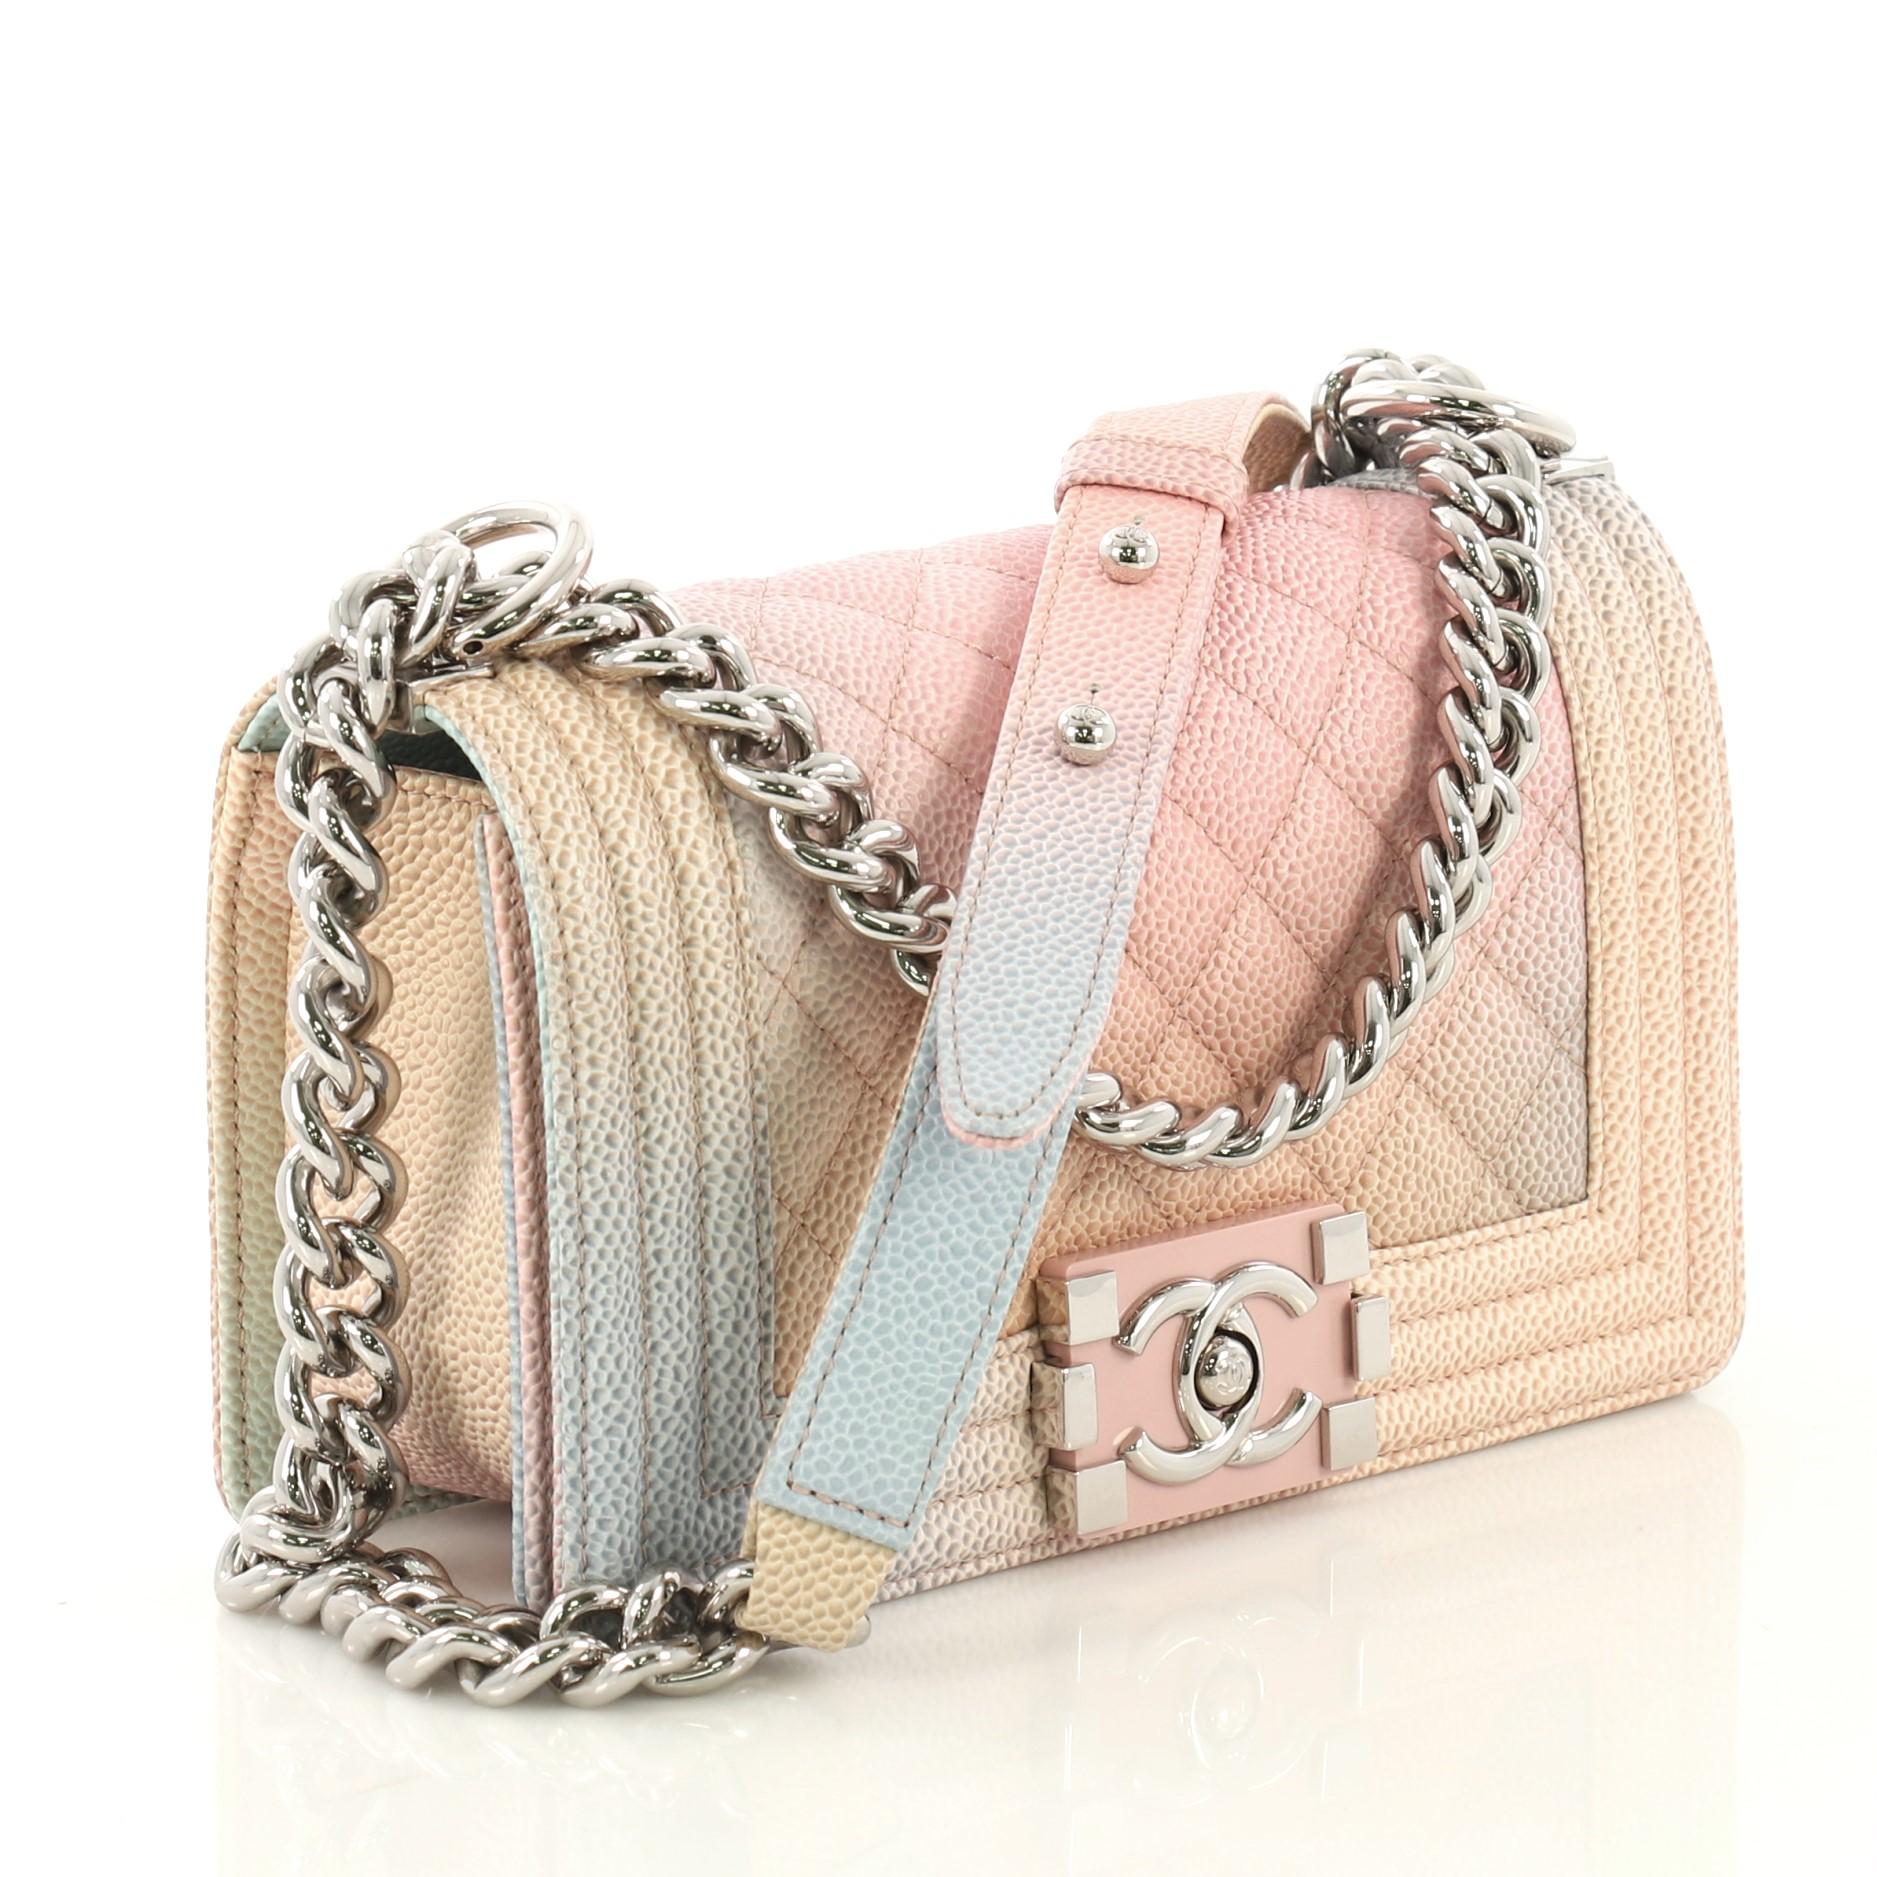 This Chanel Rainbow Boy Flap Bag Quilted Painted Caviar Small, crafted in multicolor quilted painted caviar leather, features chain link strap with leather shoulder pad and silver-tone hardware. Its boy push-lock closure opens to a pink fabric